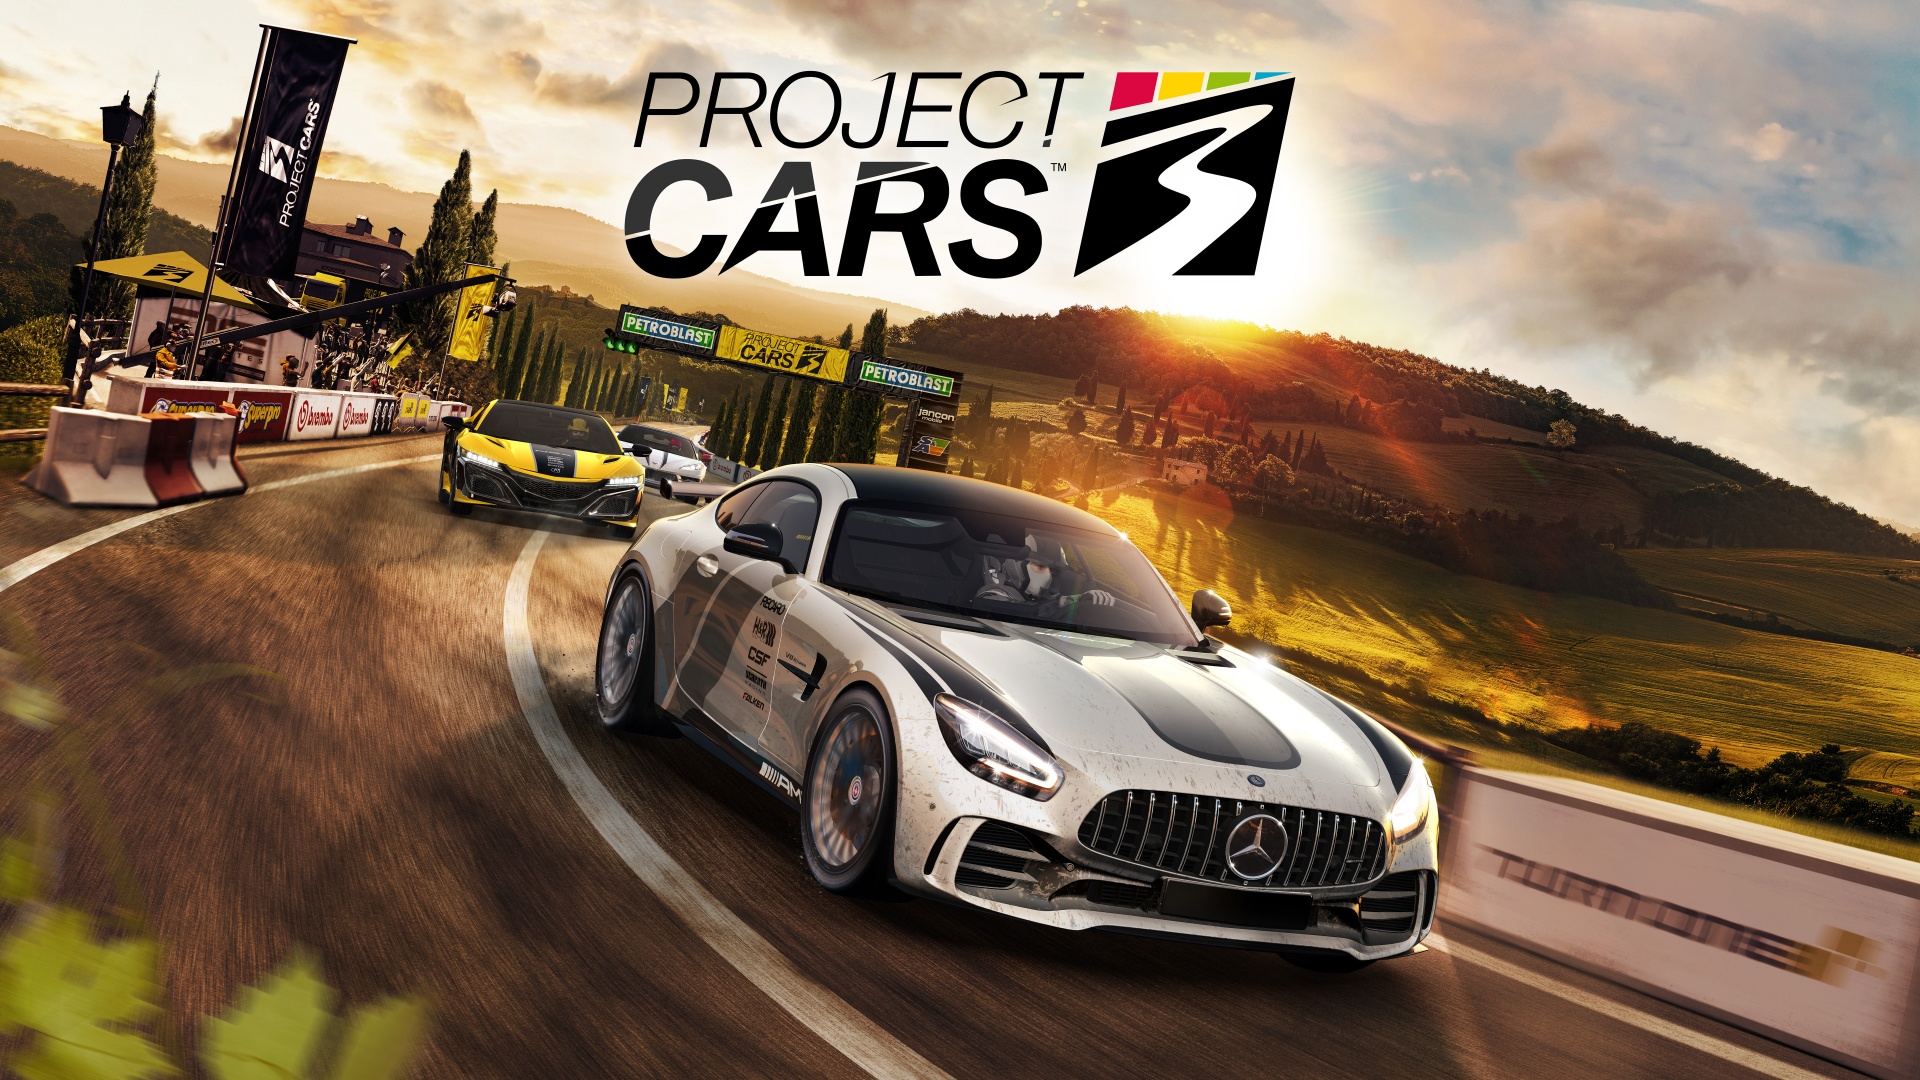 Project Cars 3 4K Wallpaper, Mercedes-AMG GT R, PC Games, PlayStation 4